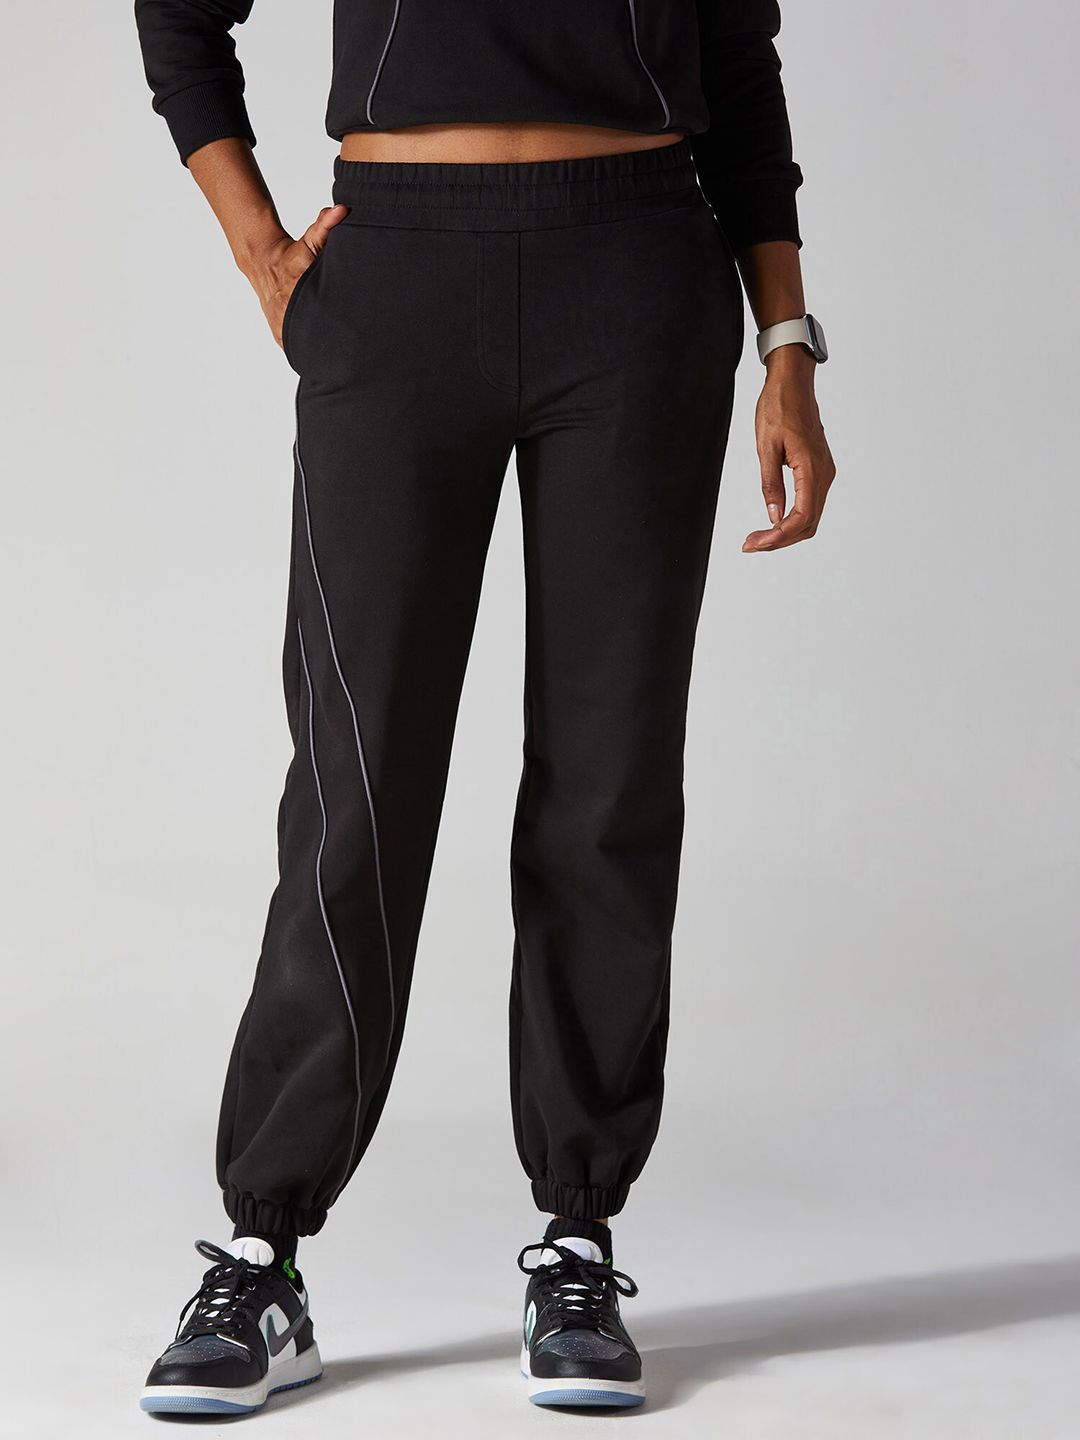 CAVA Women Mid-Rise Plain Cotton Tapered Fit Joggers Trousers Price in India